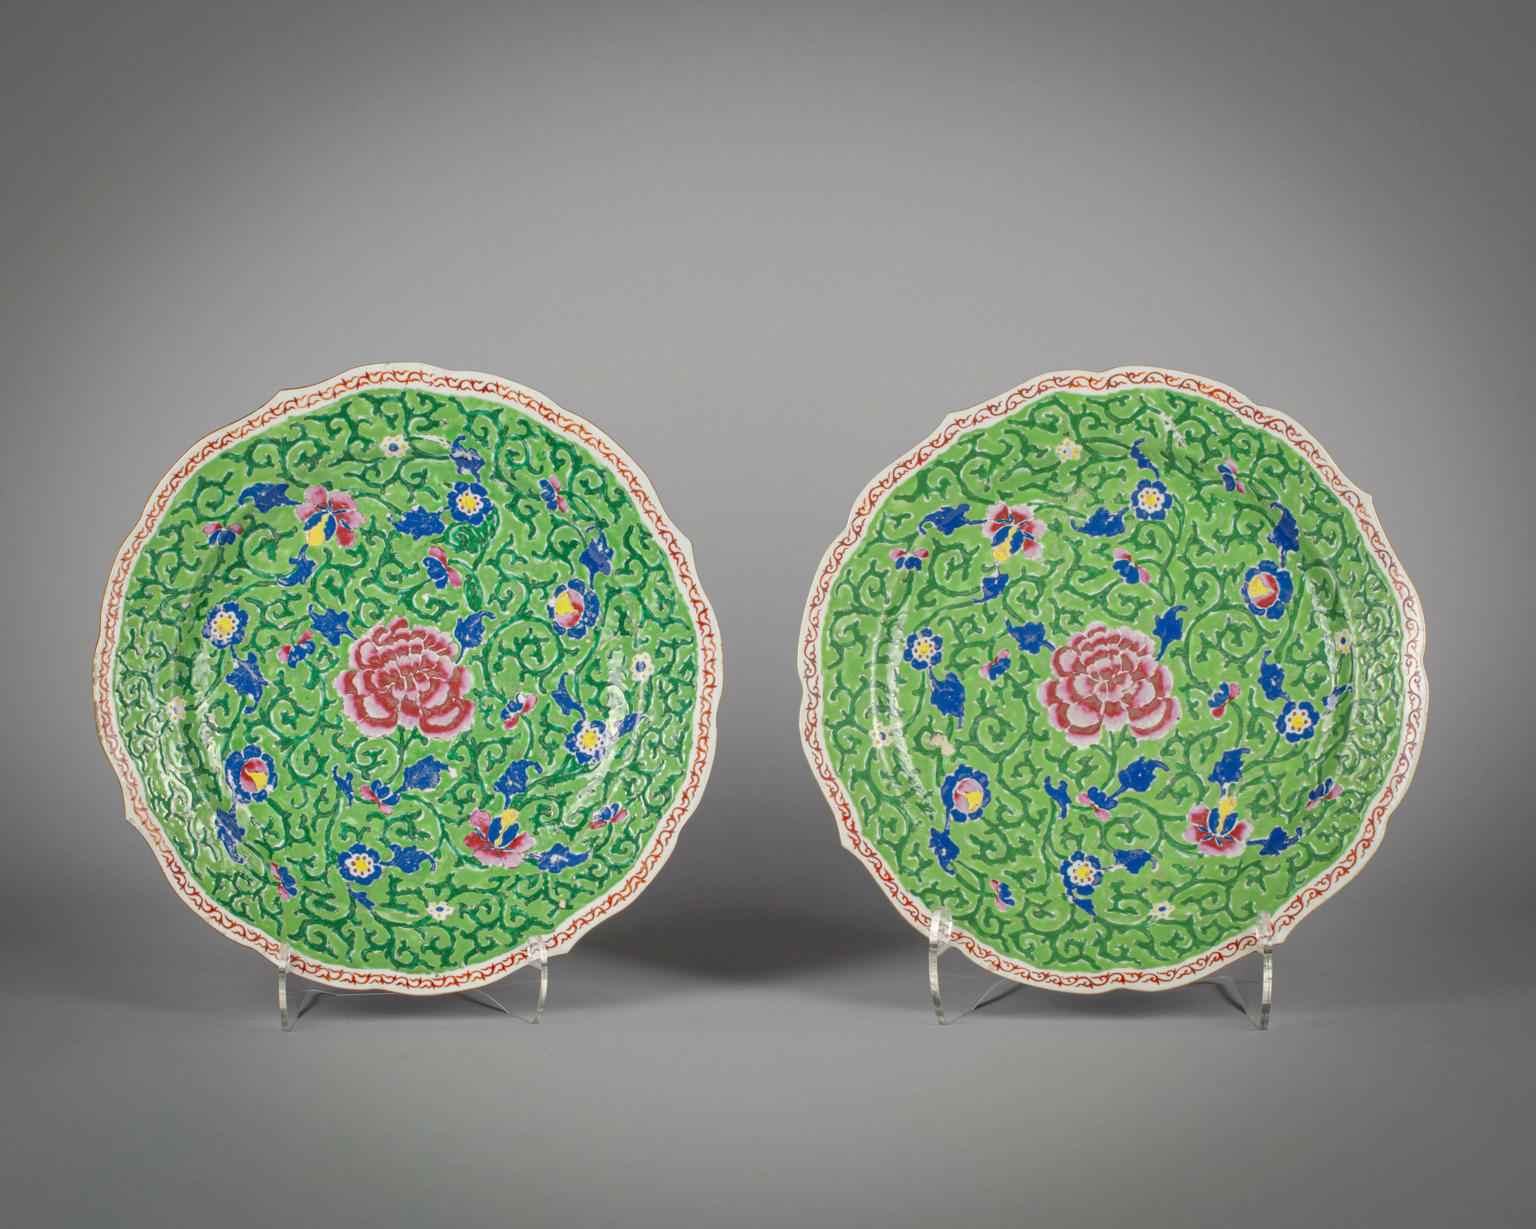 Finely enameled in shades of rose and cobalt with flowers with dark green tendrils, the border with iron red scroll pattern. 